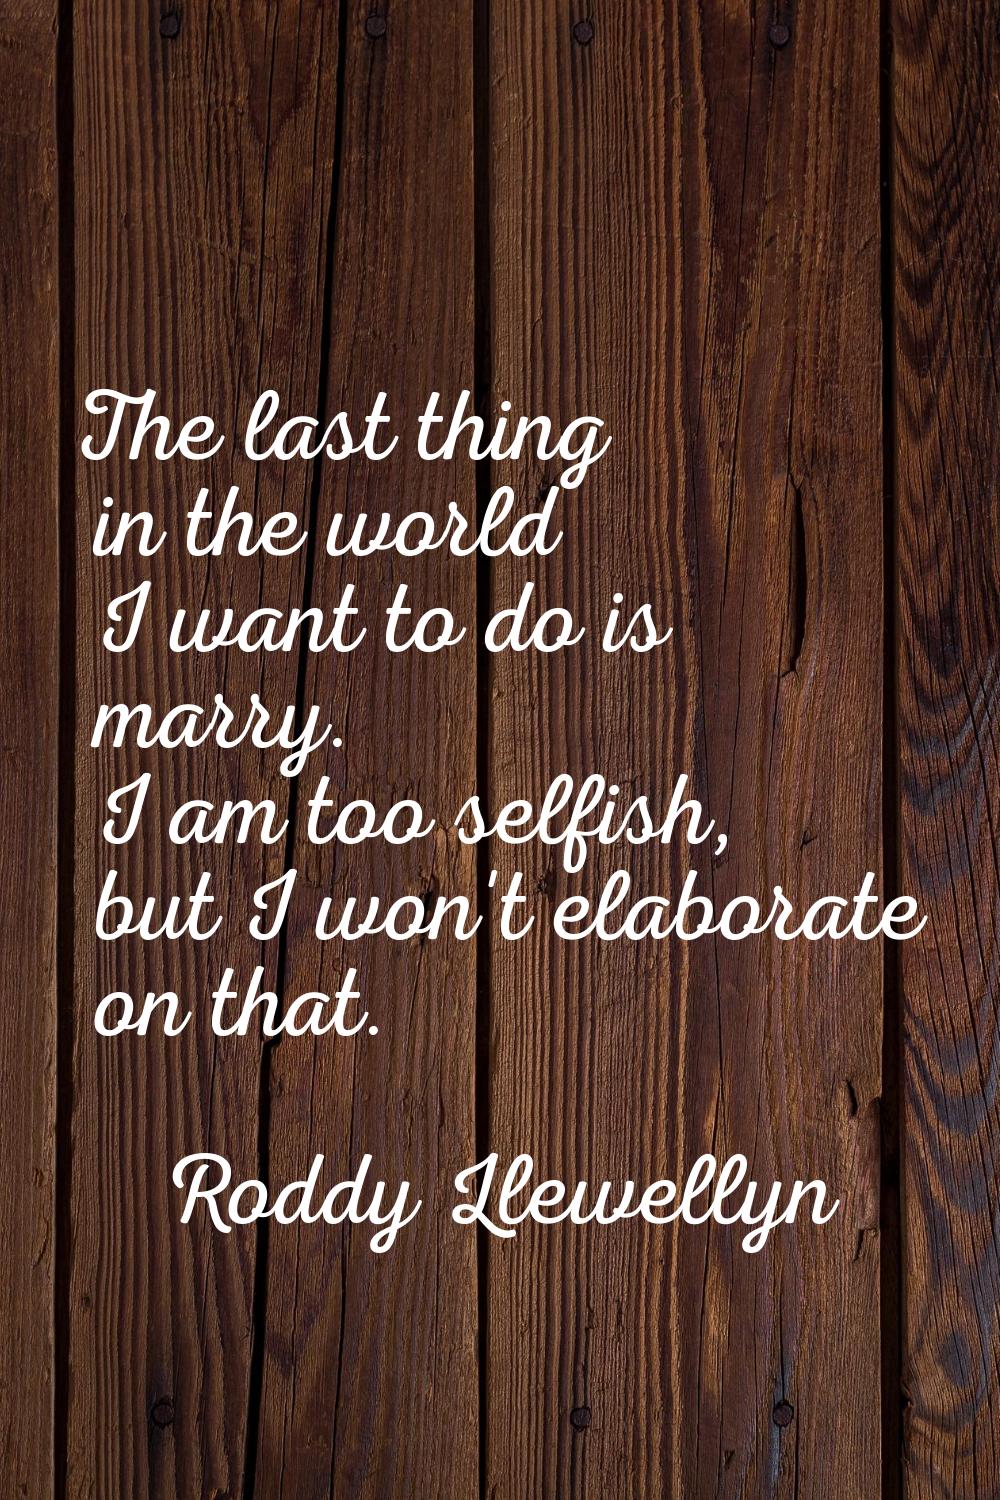 The last thing in the world I want to do is marry. I am too selfish, but I won't elaborate on that.